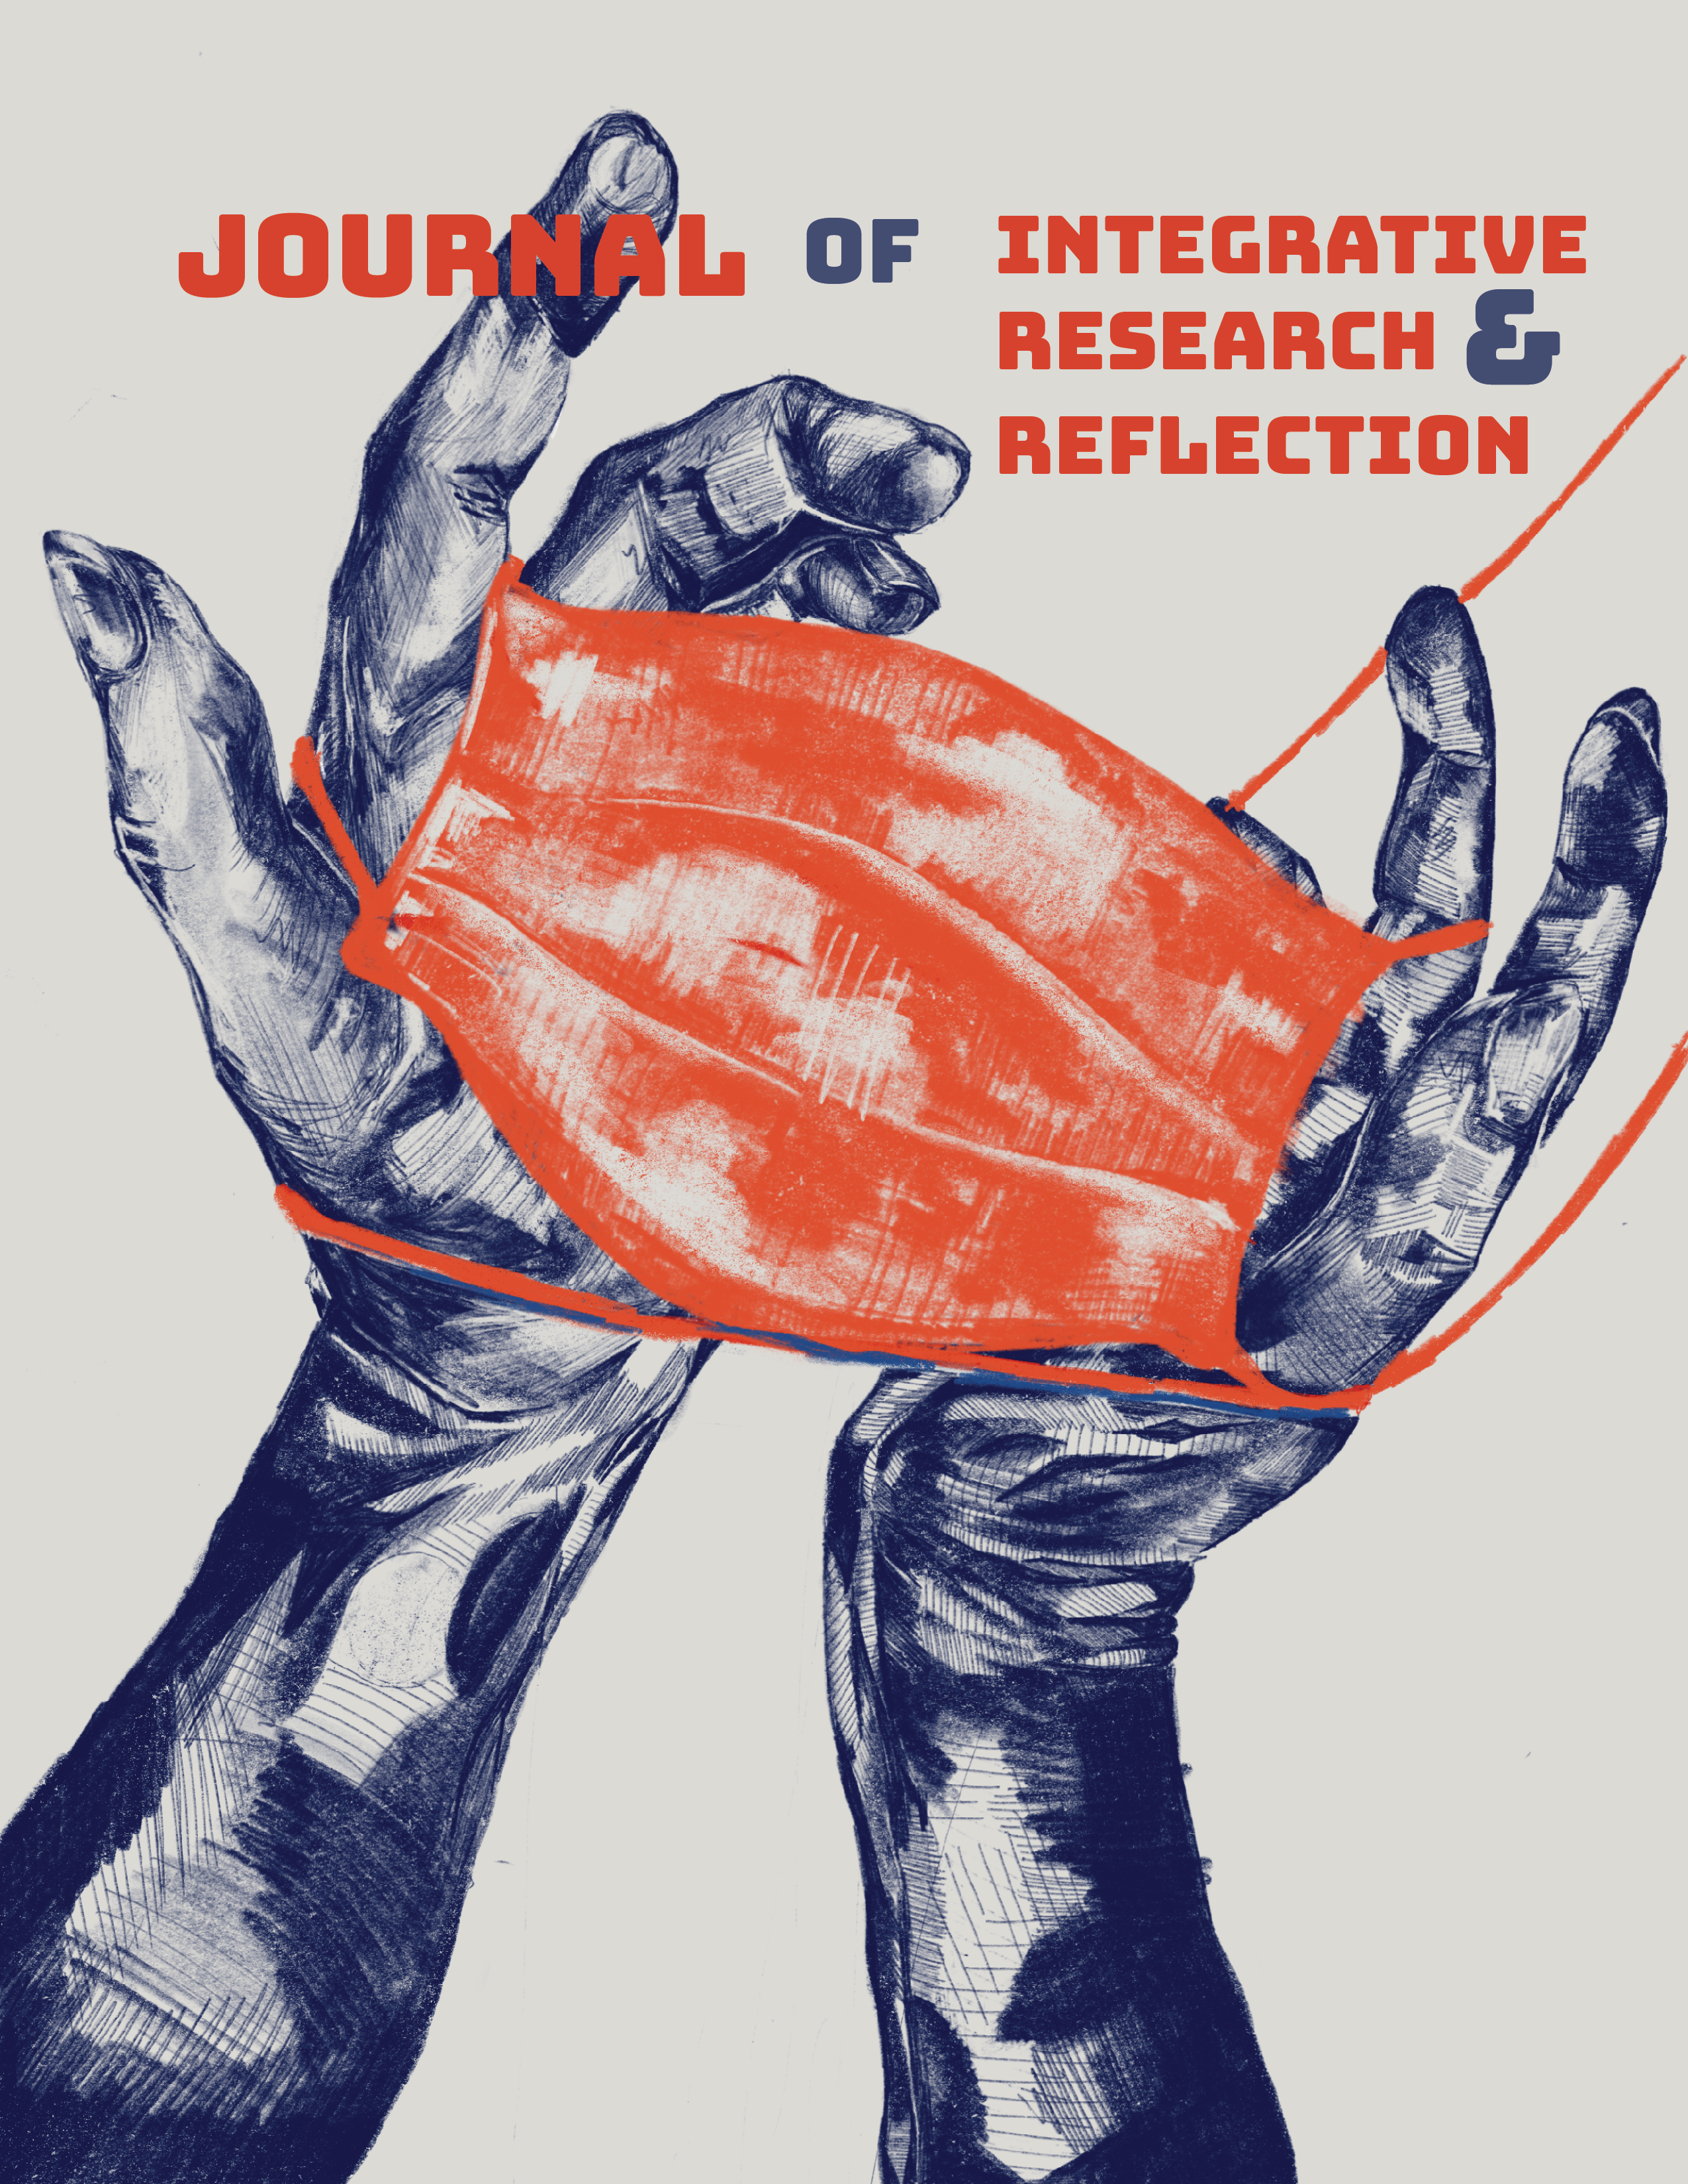 					View Vol. 4 (2021): Journal of Integrative Research & Reflection
				